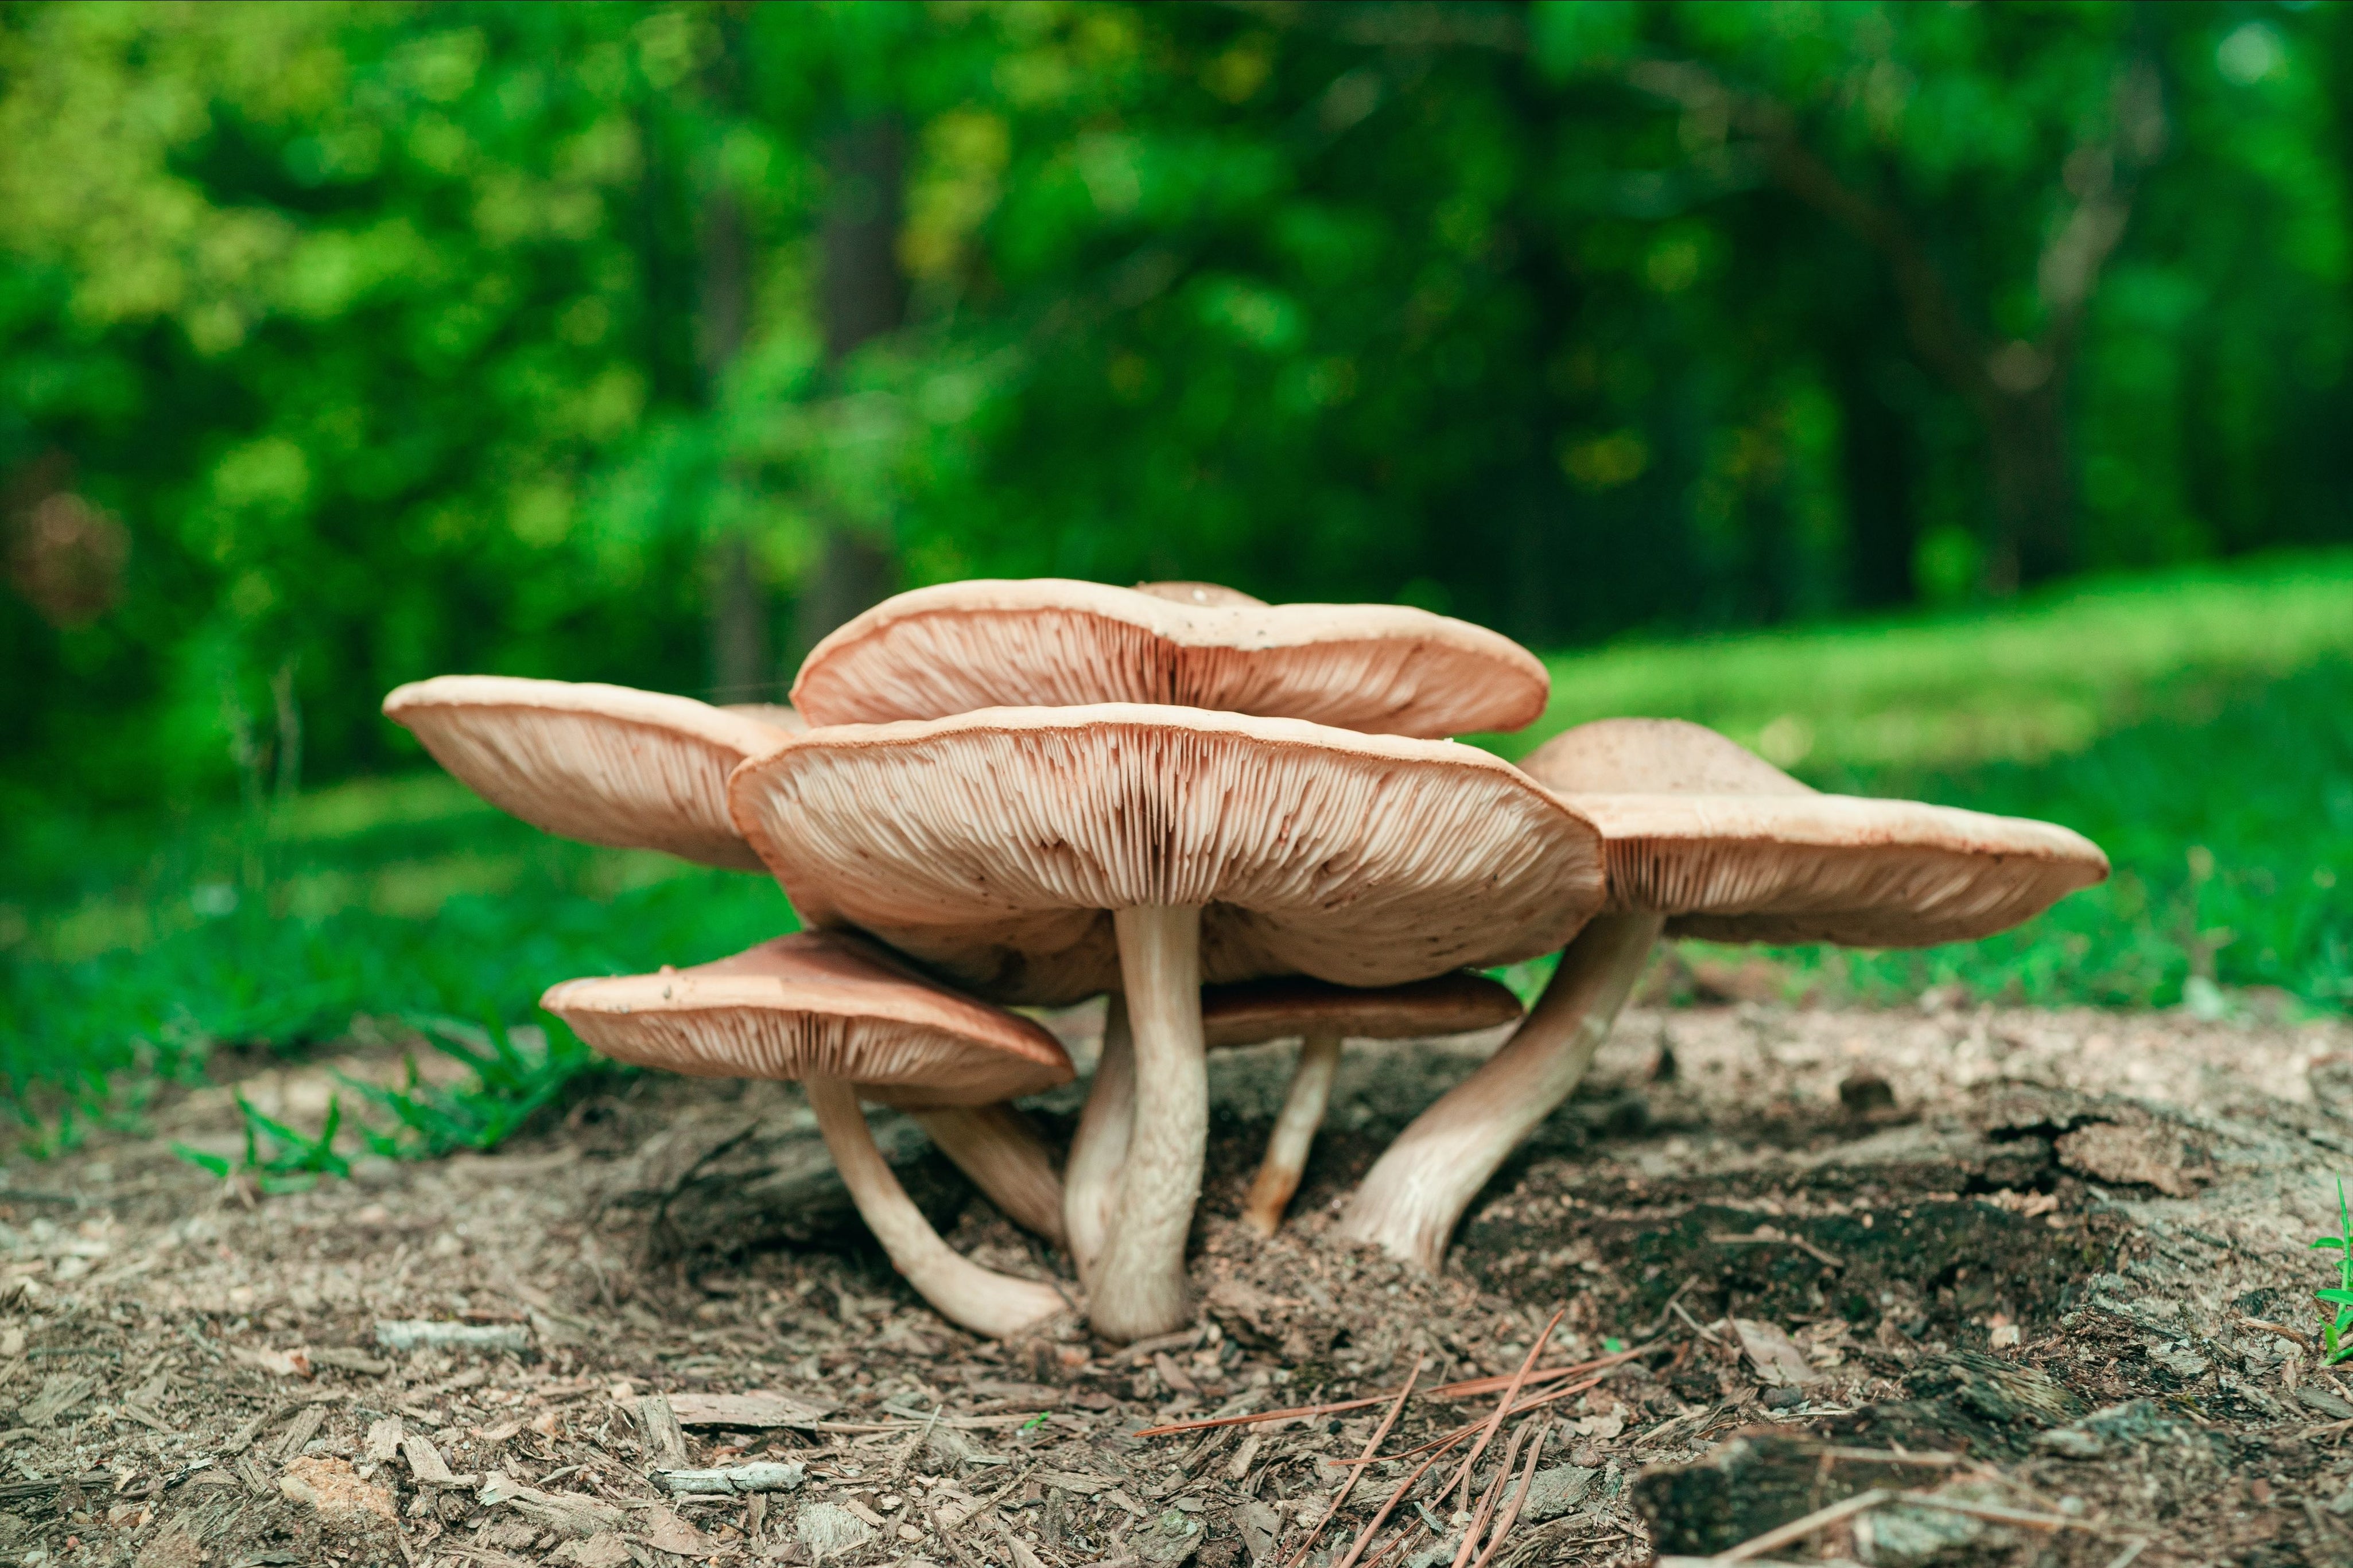 How To Grow Mushrooms: A Step-by-Step Guide